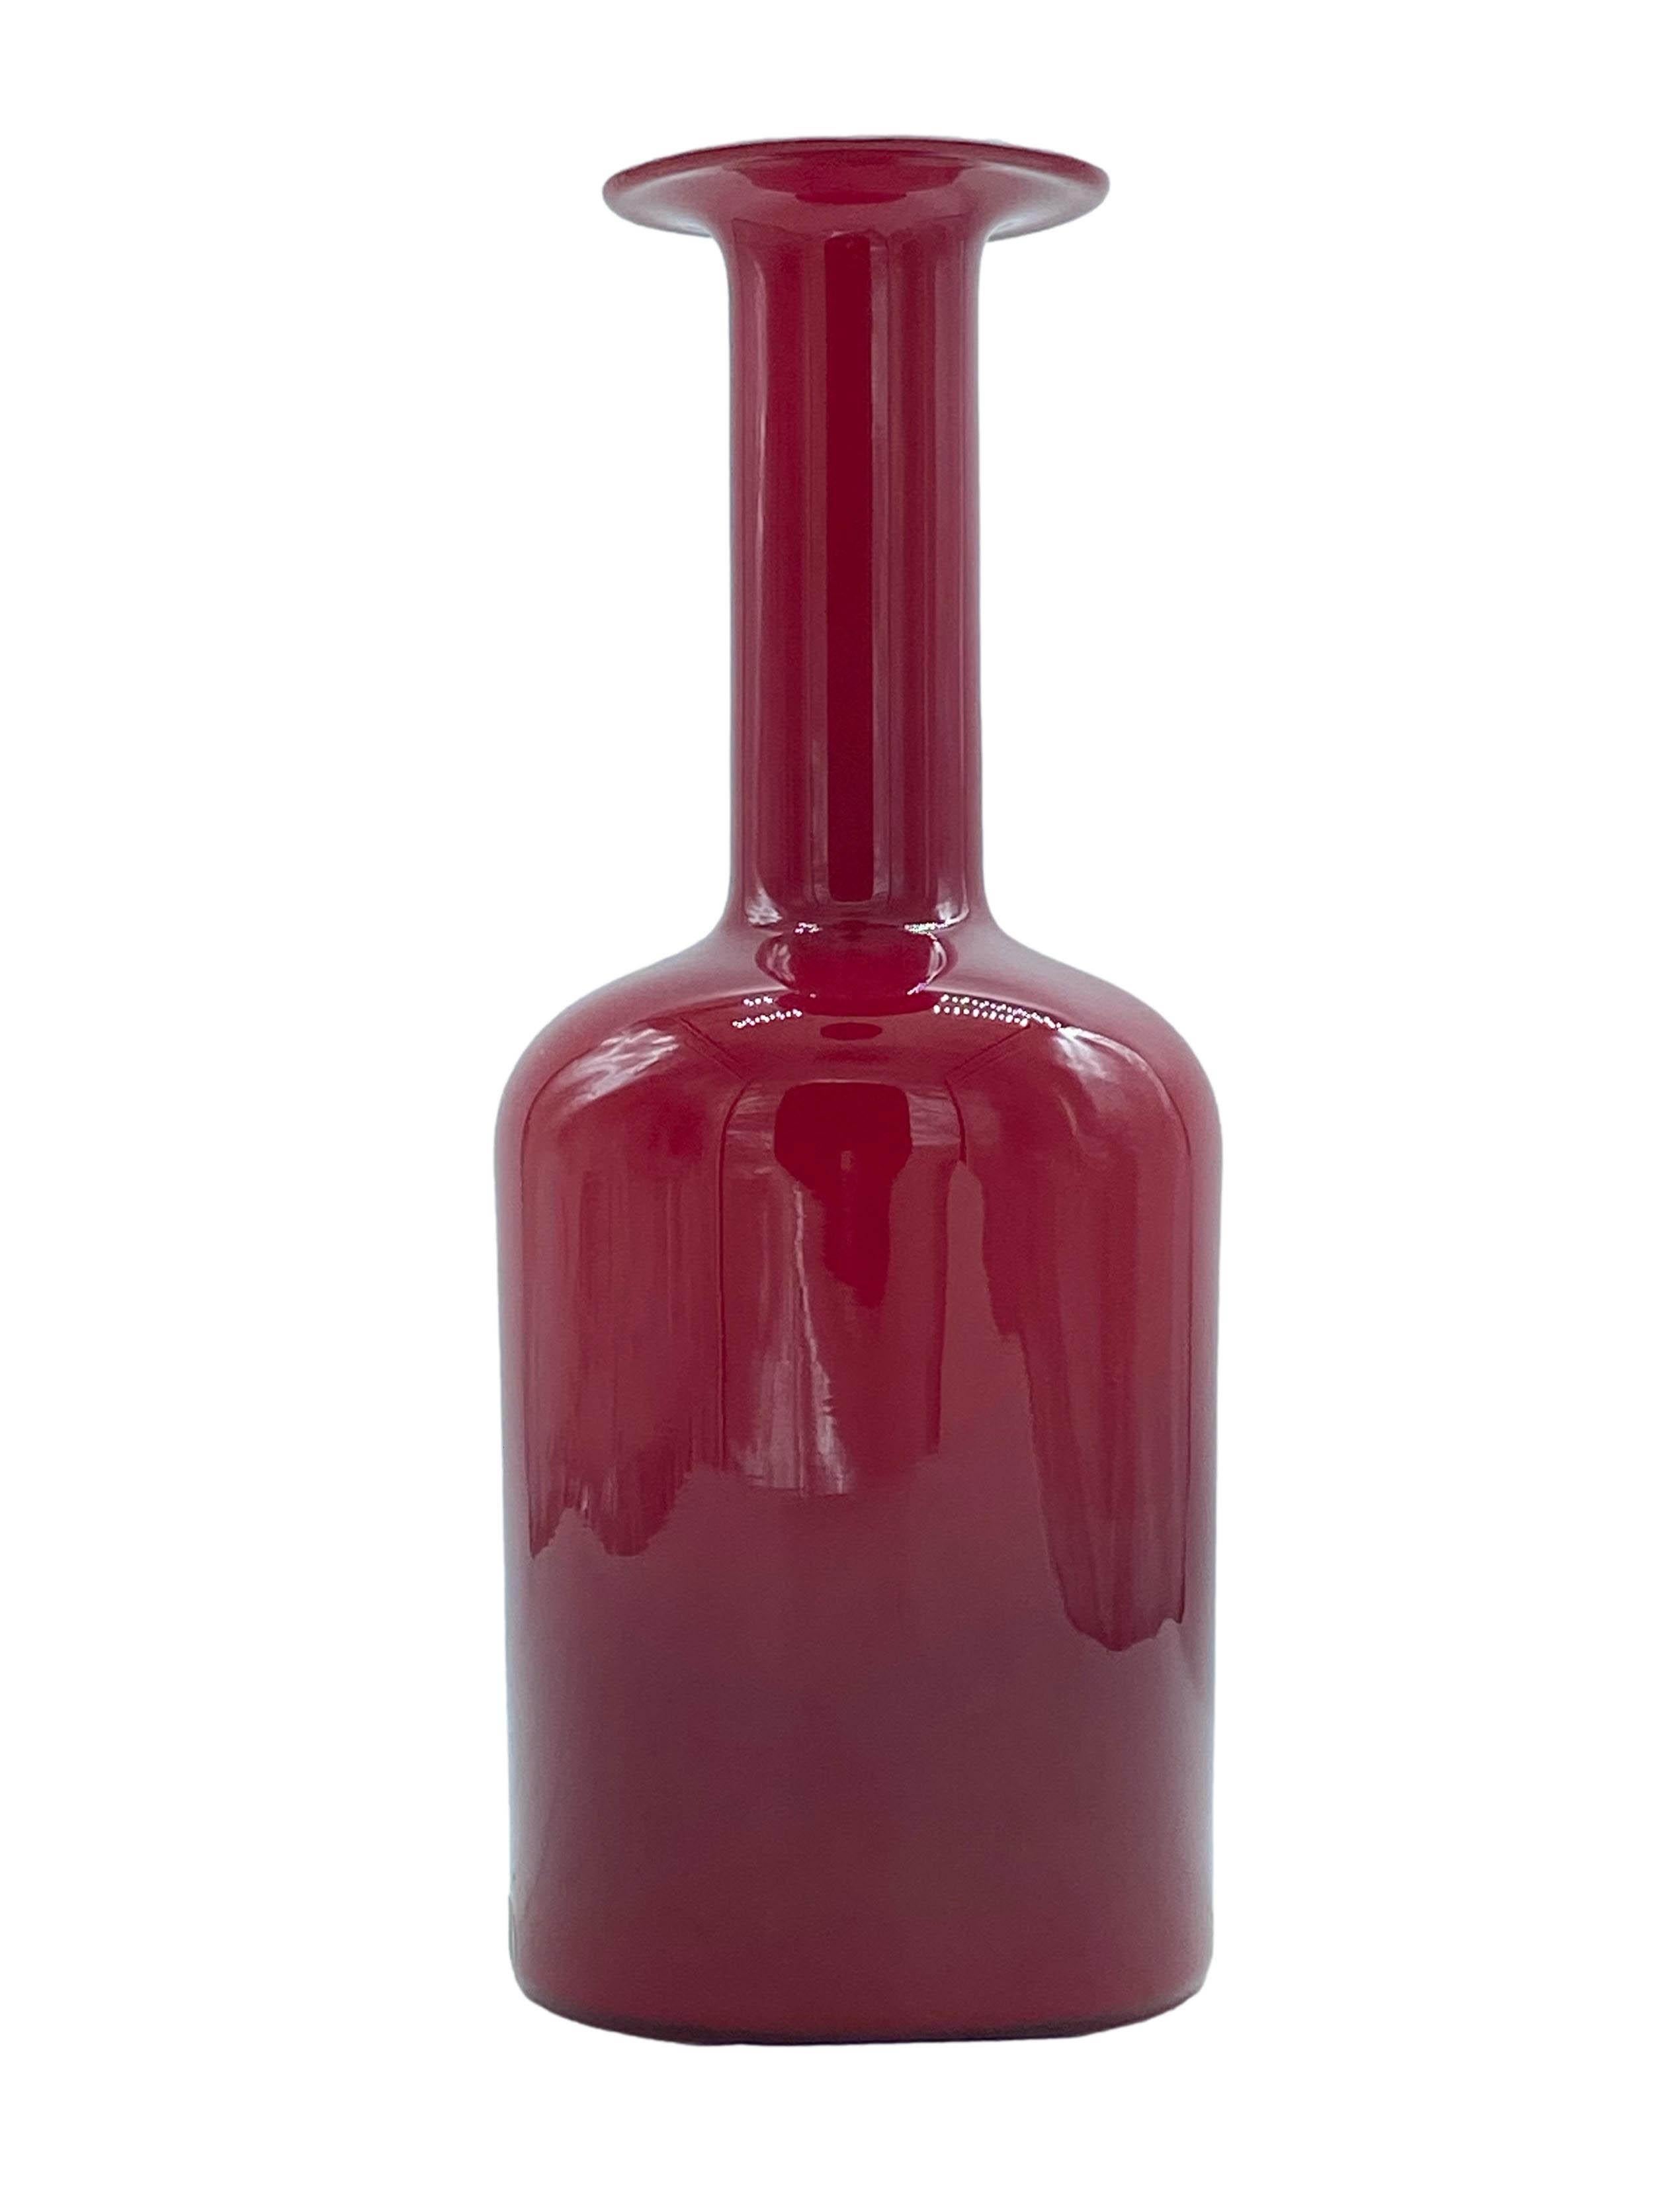 Iconic Scandinavian glass bottle or vase designed by Otto Brauer for Holmegaard, produced in Denmark in the 1960s.